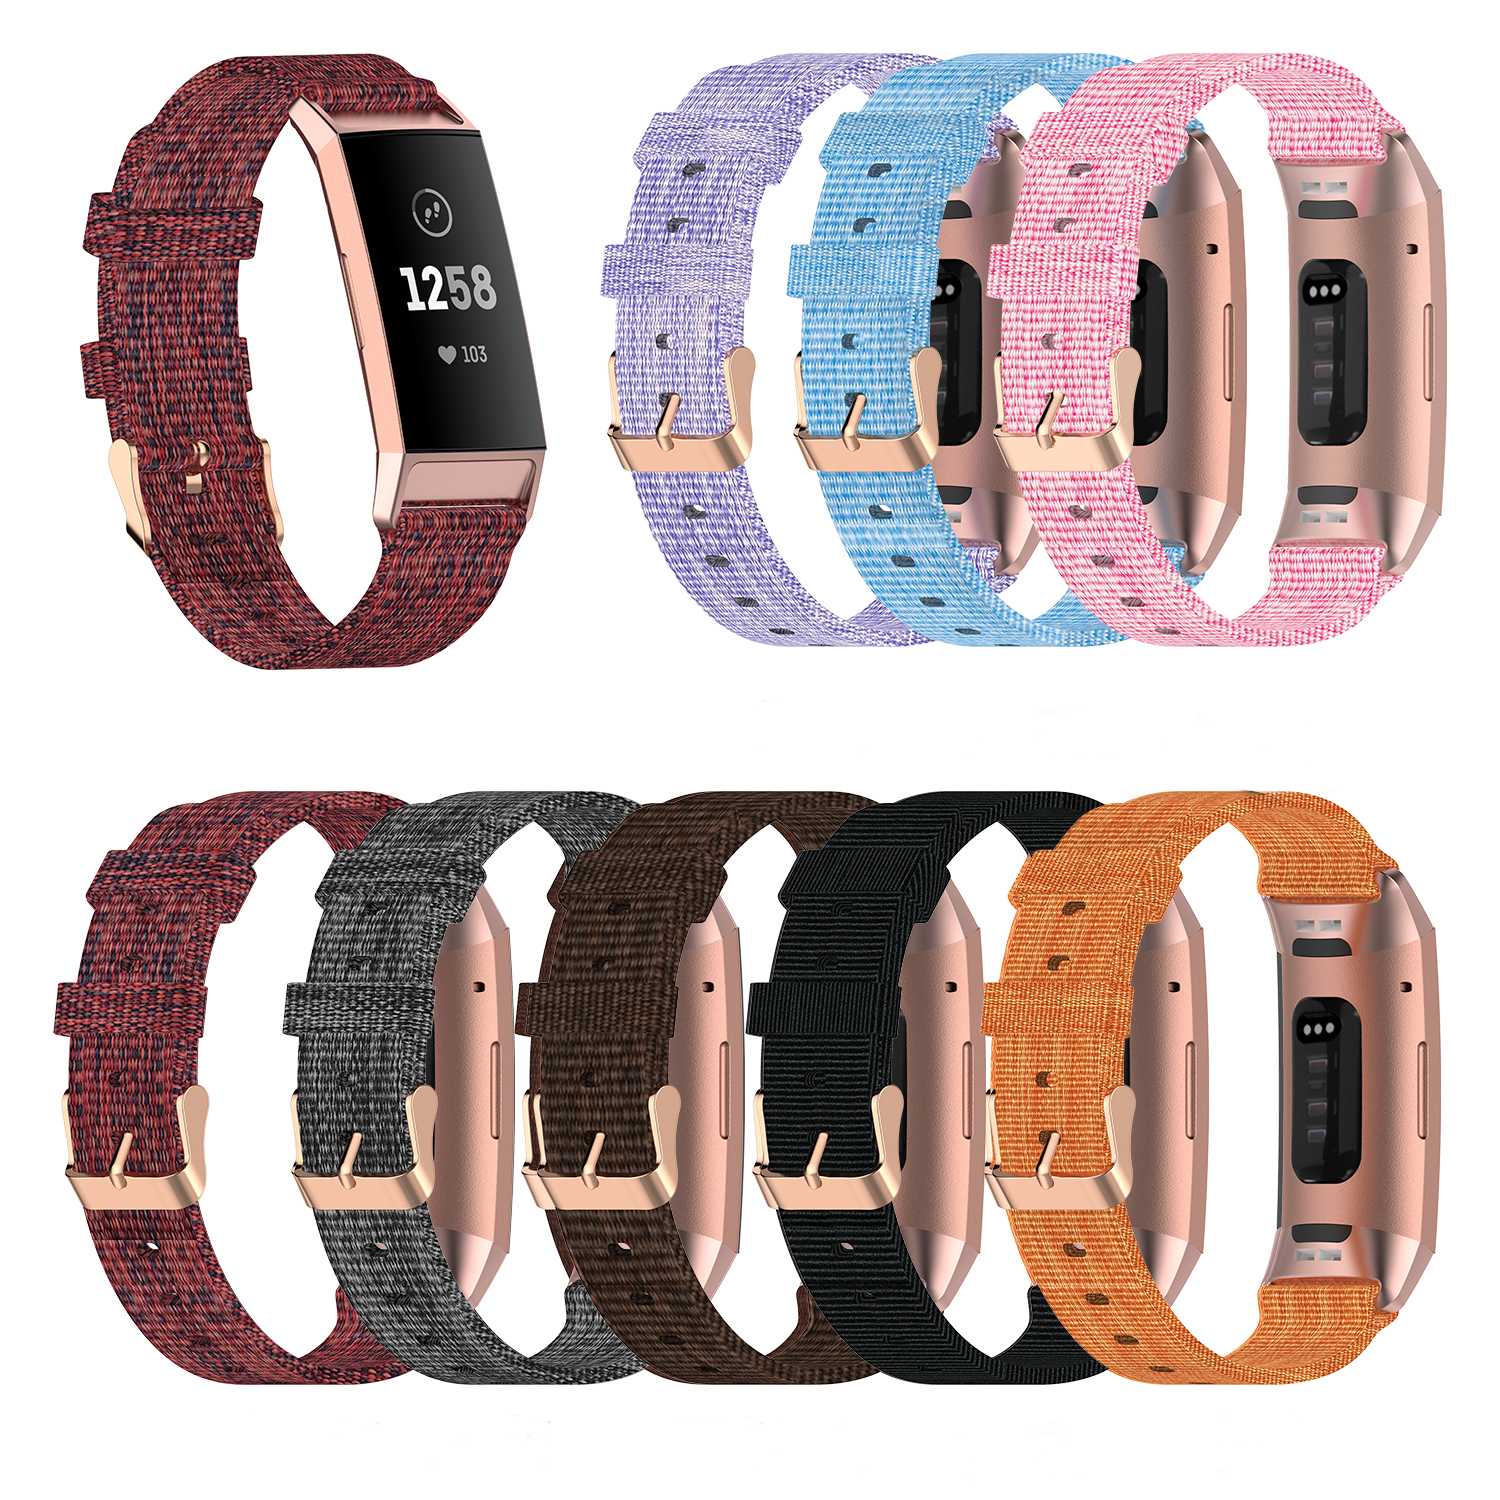 Bakeey-Nylon-Canvas-Woven-Smart-Watch-Band-Replacement-Strap-For-Fitbit-Charge-34-1727948-2